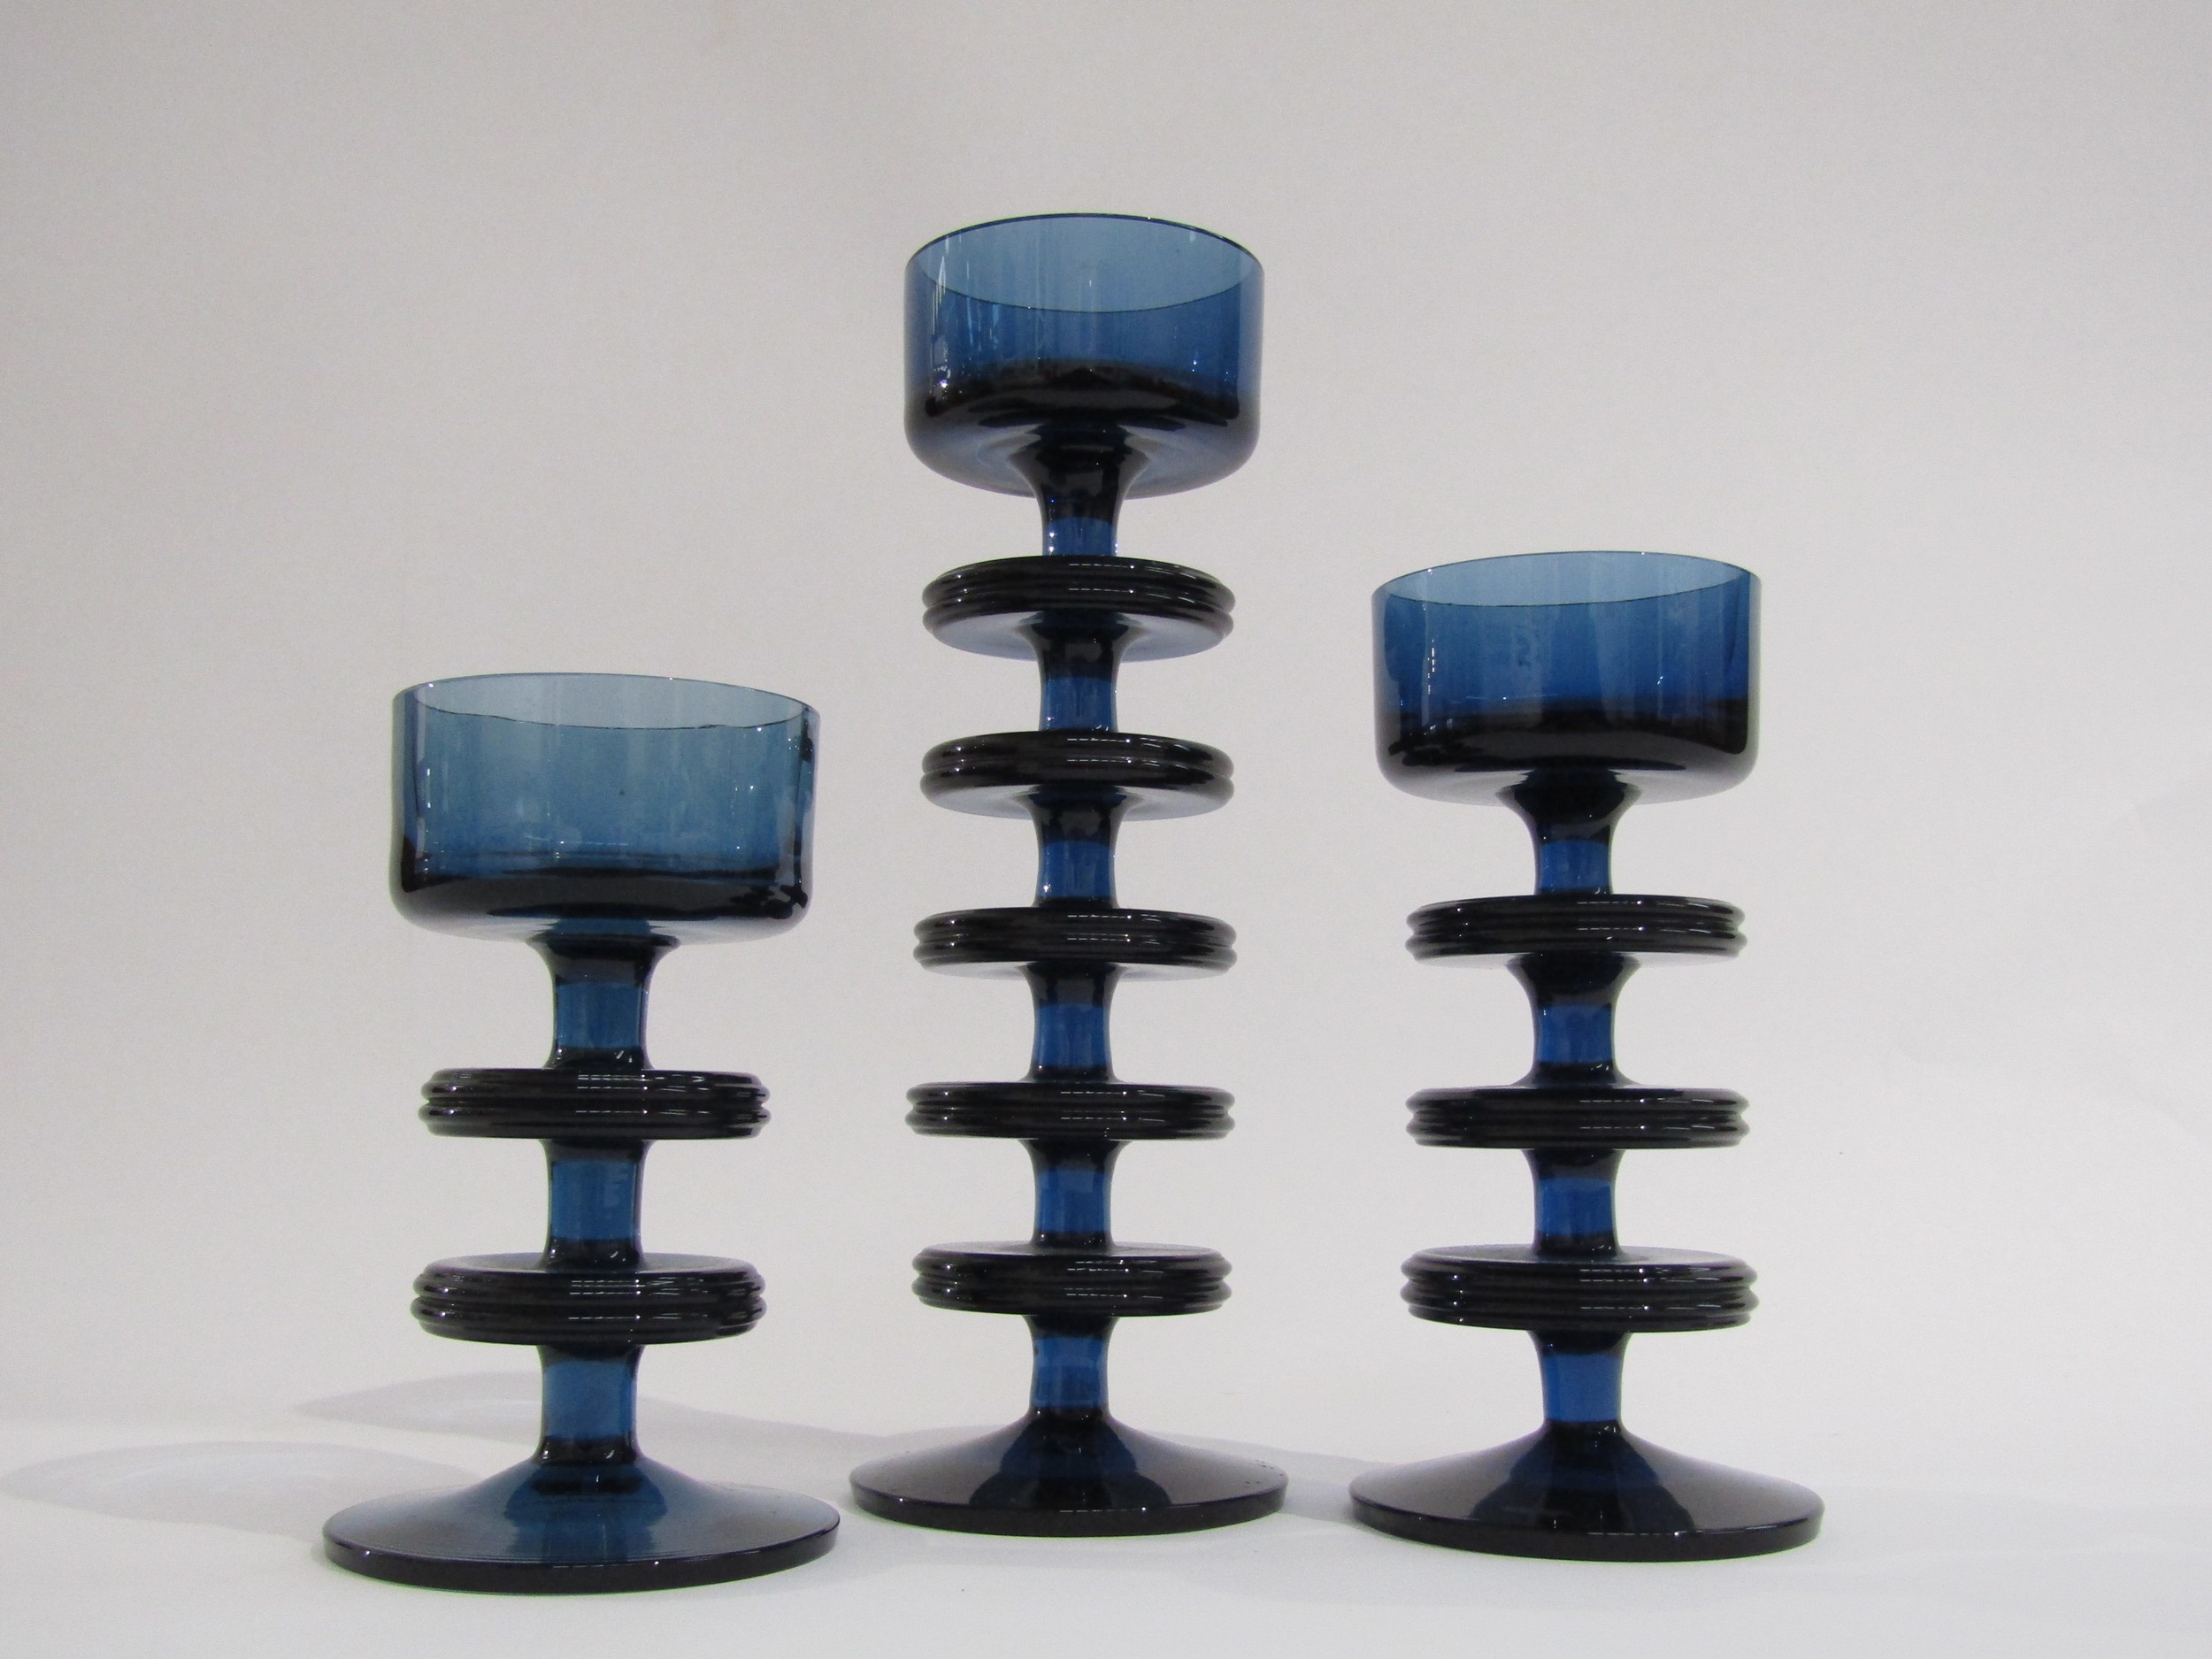 Three Sheringham candleholders in blue glass 1 x 5 ring, 1 x 3 ring and 1 x 2 ring, designed by - Image 2 of 2